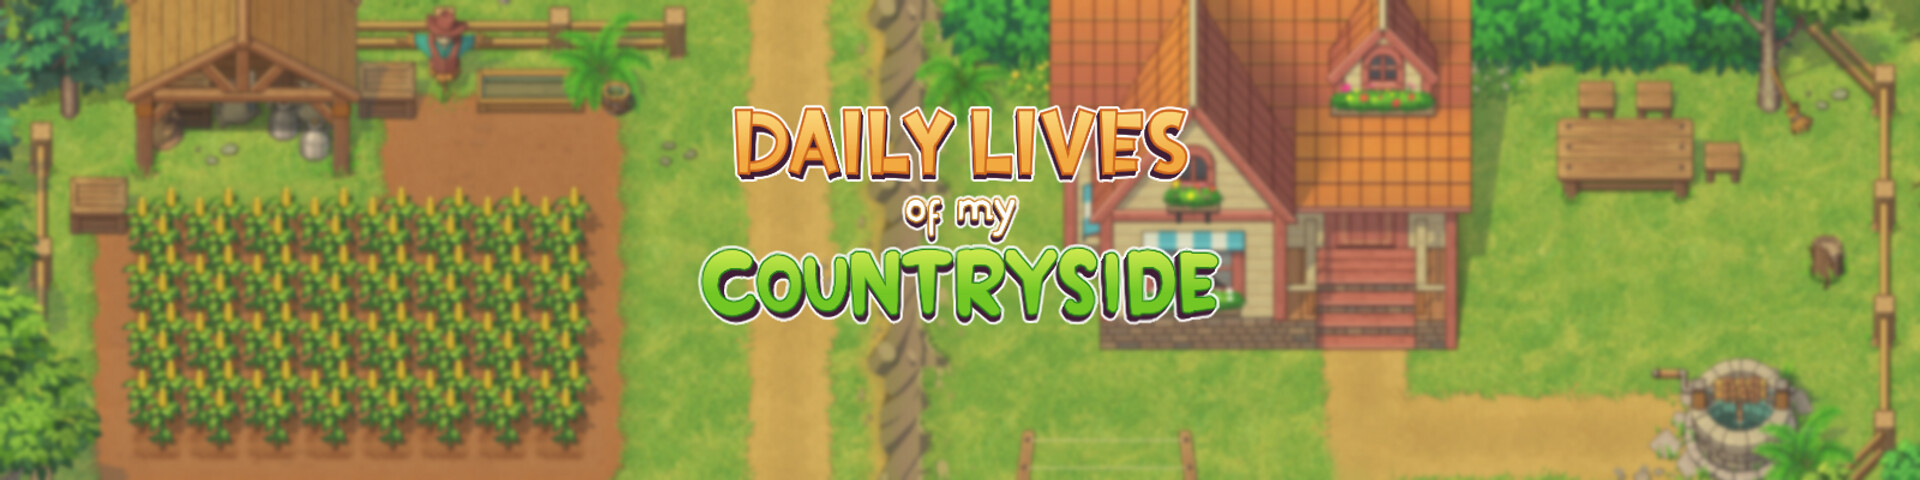 Daily Lives of My Countryside Main Image